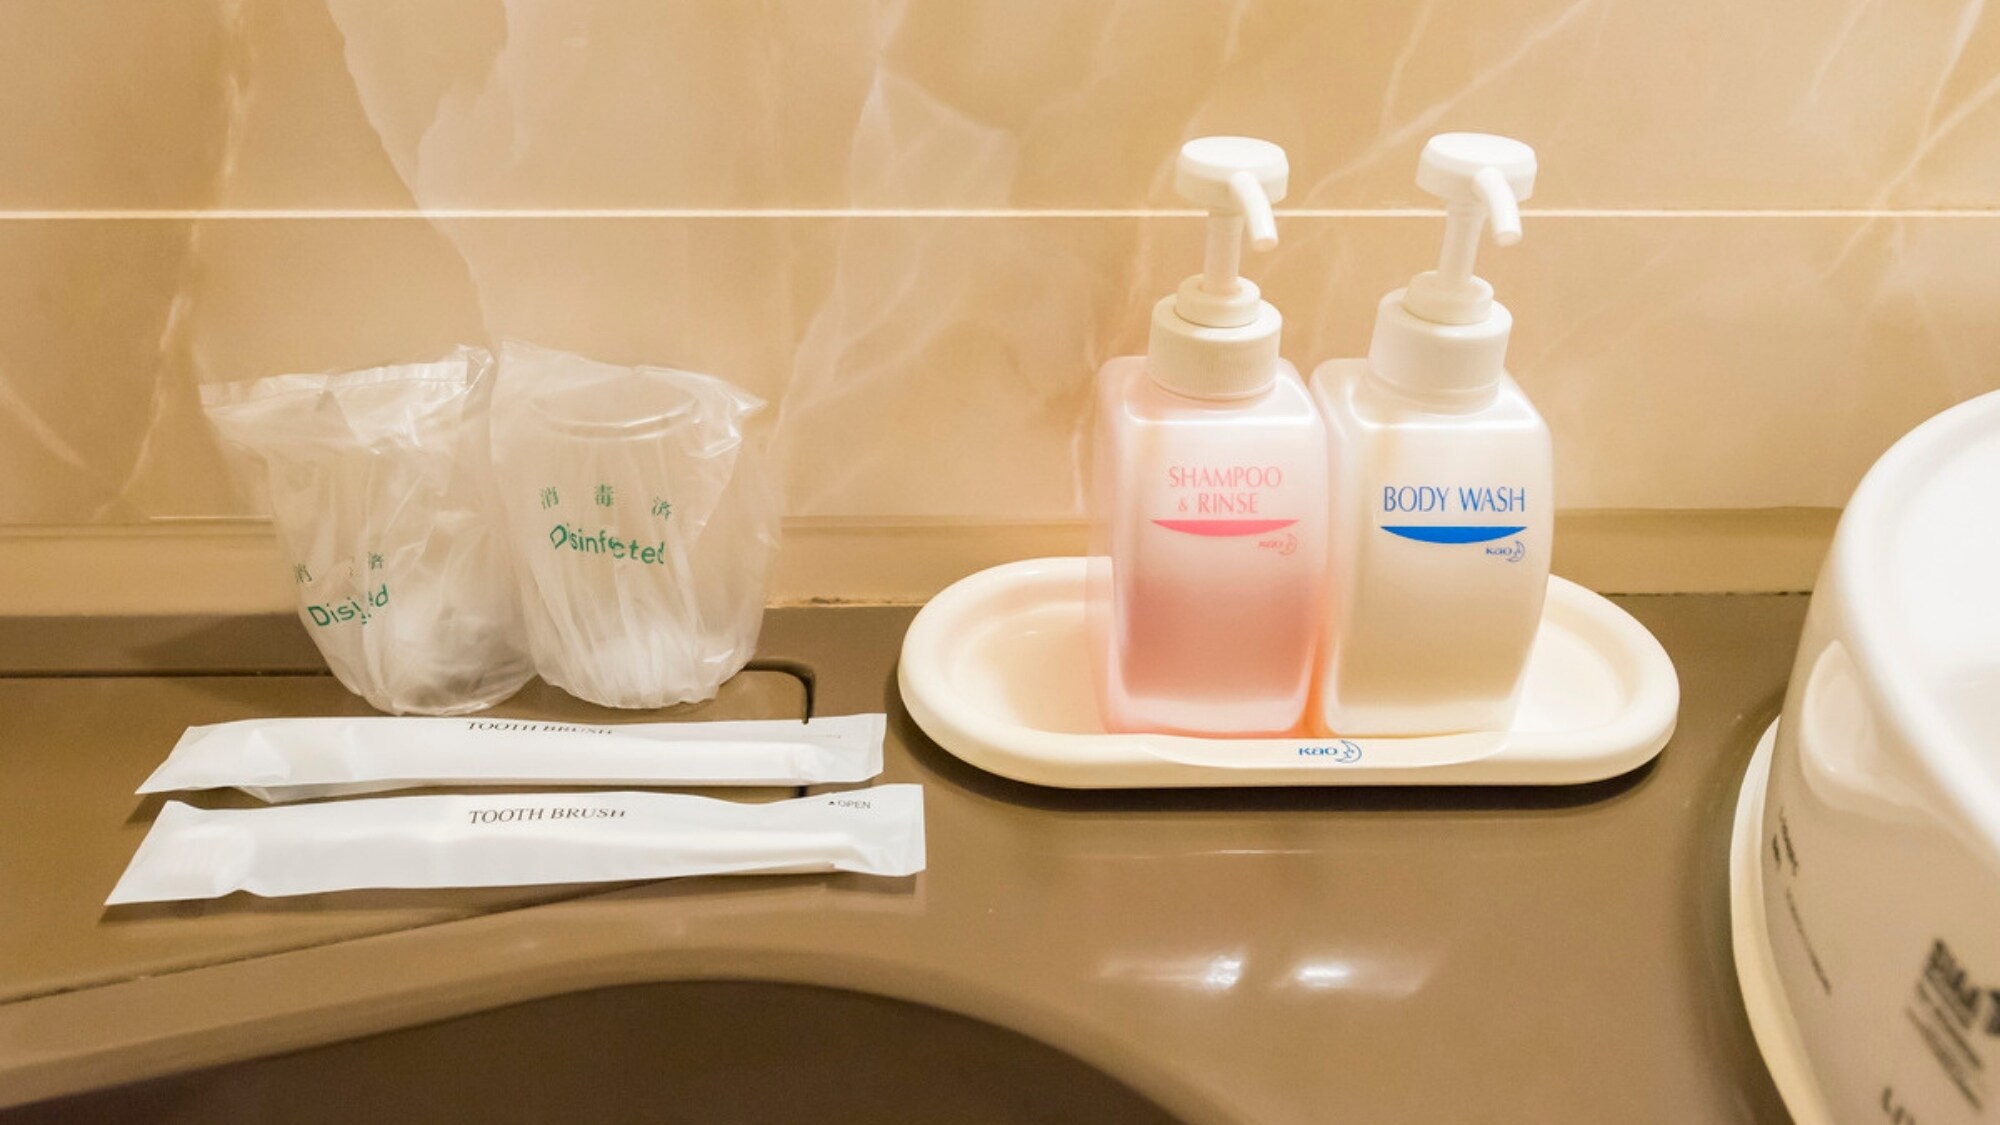 Room amenities are really minimal. Please prepare what you need before your stay.